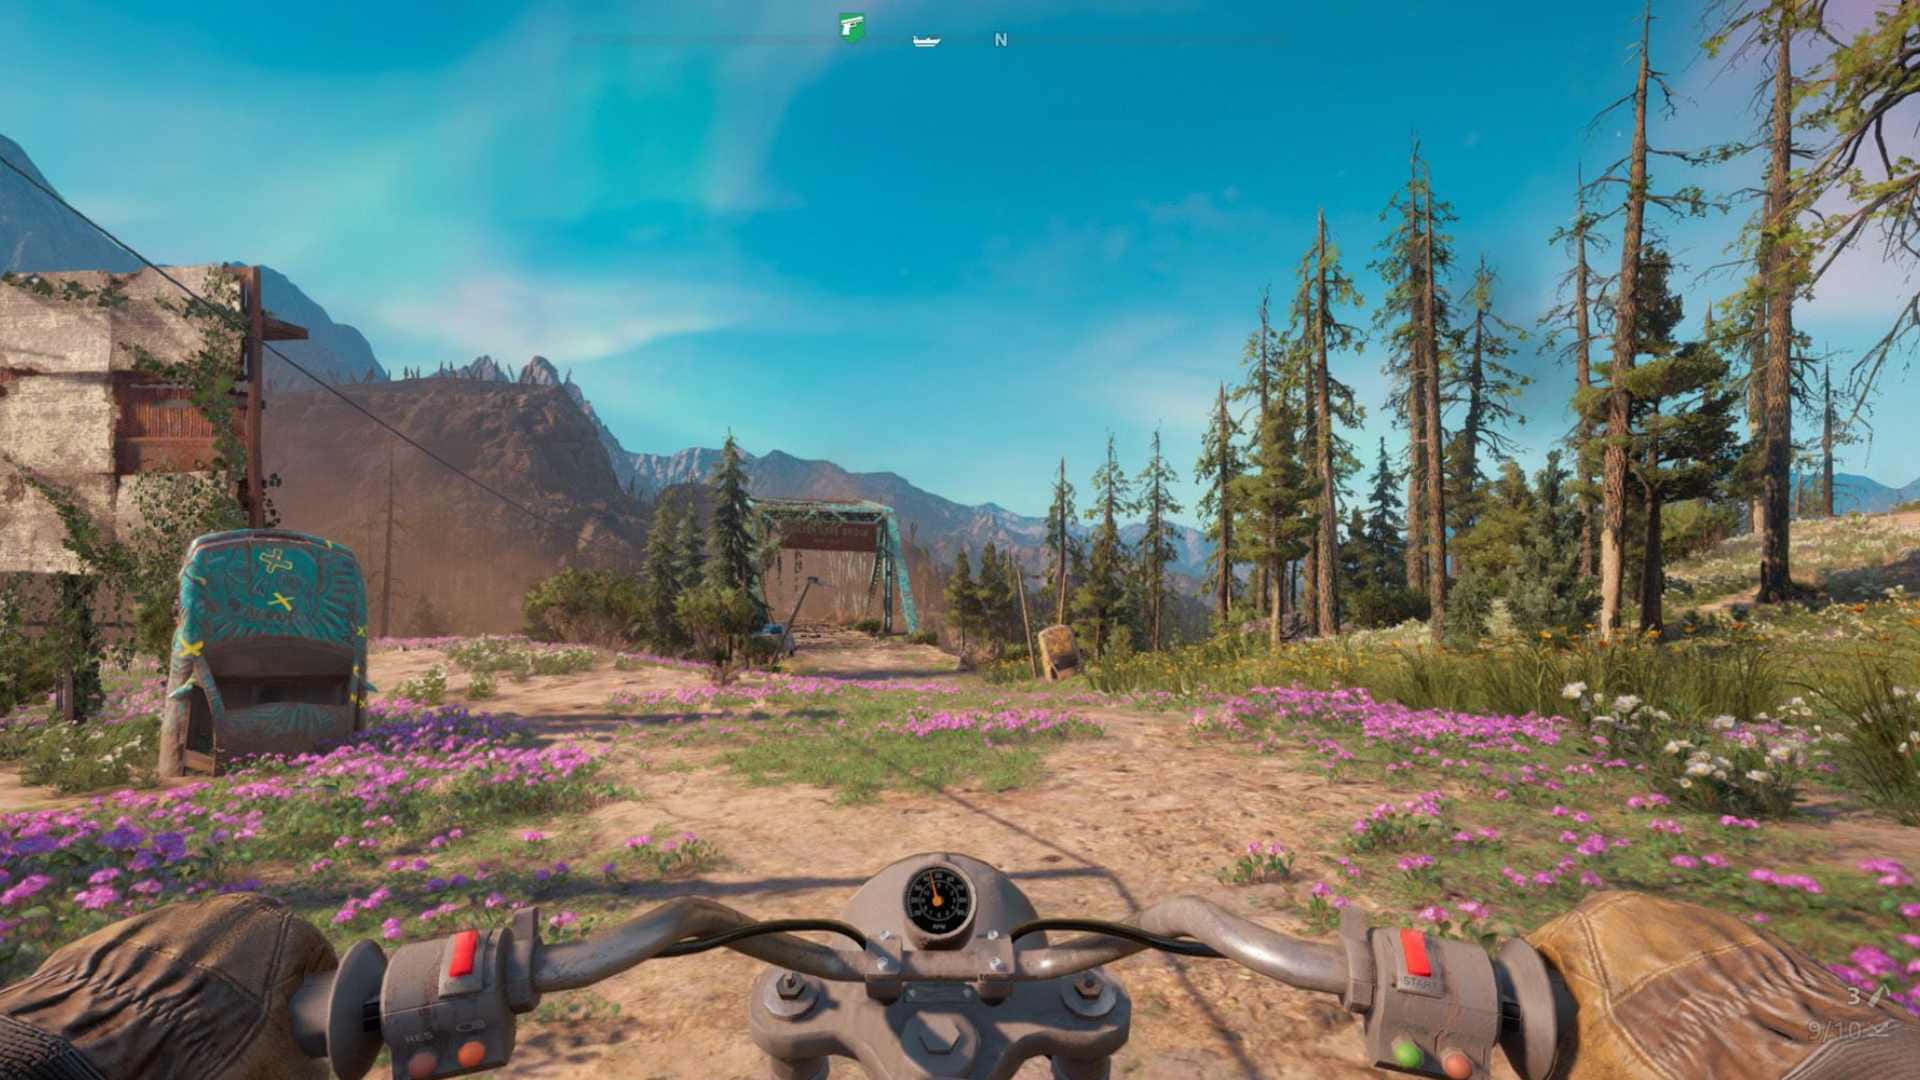 A Motorcycle Is Driving Through A Field Of Flowers